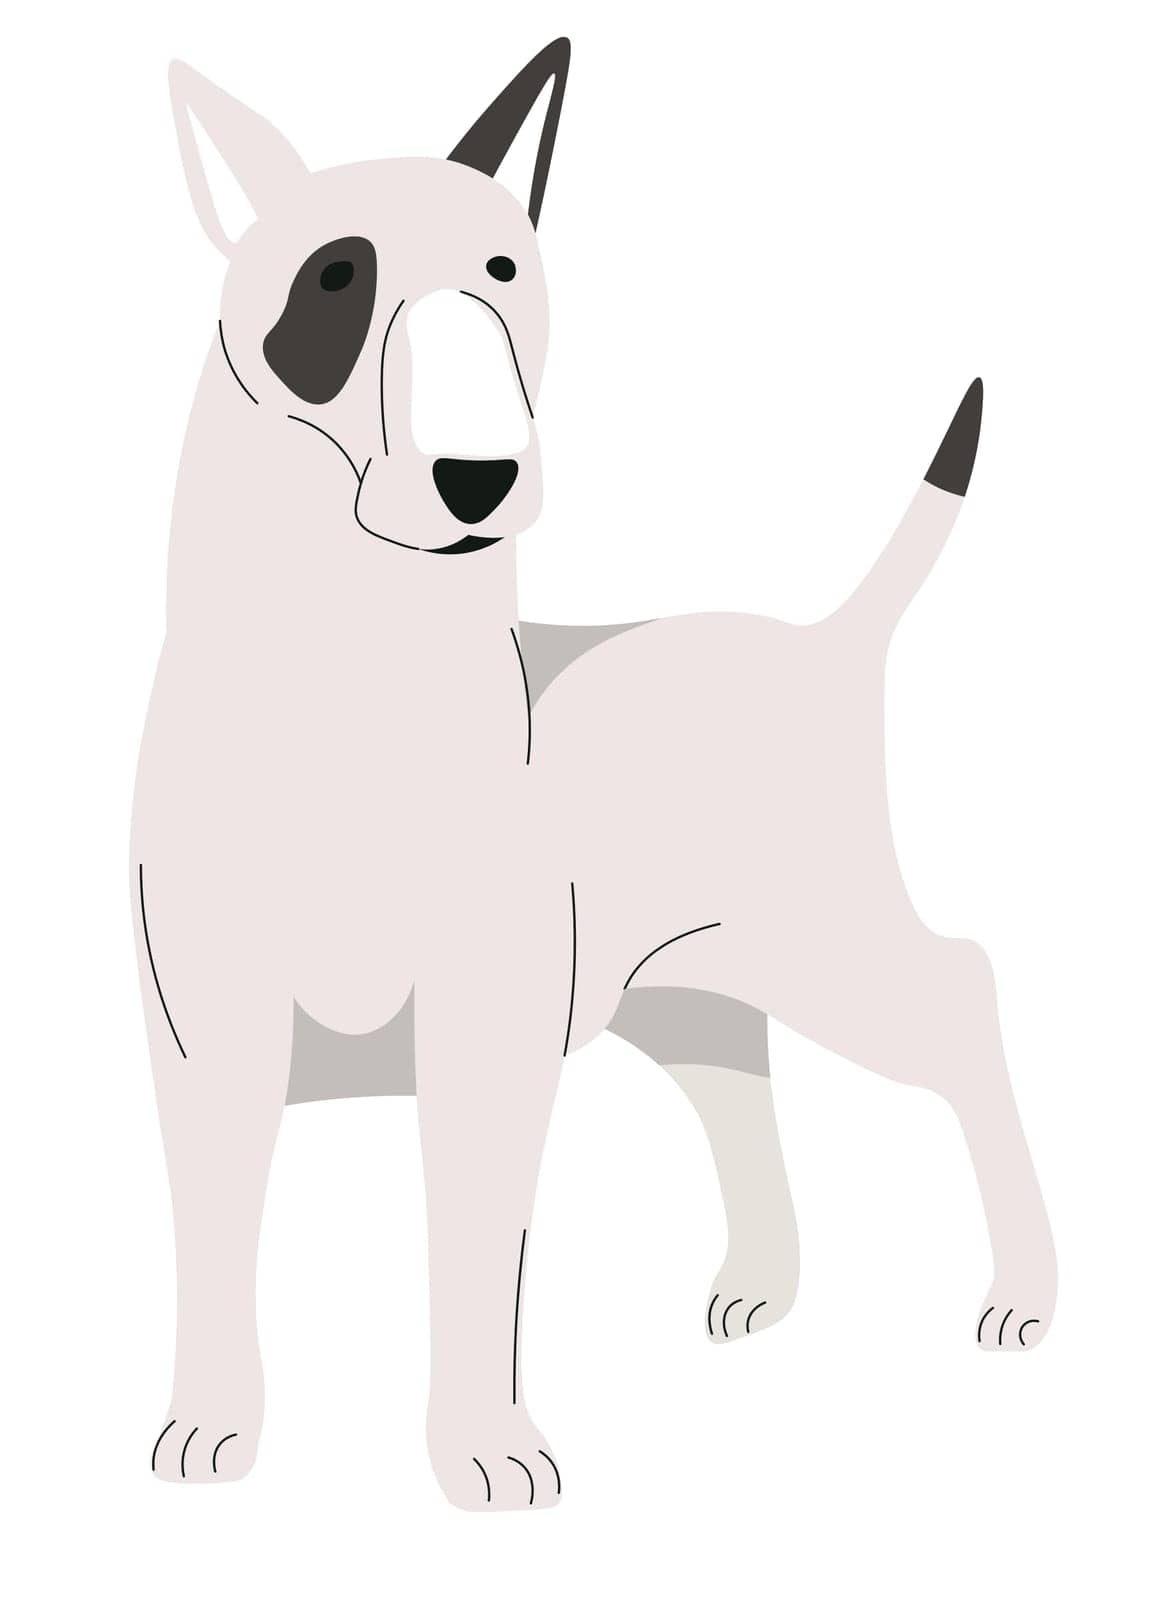 Bull terrier breed of dogs, puppy canine animal by Sonulkaster